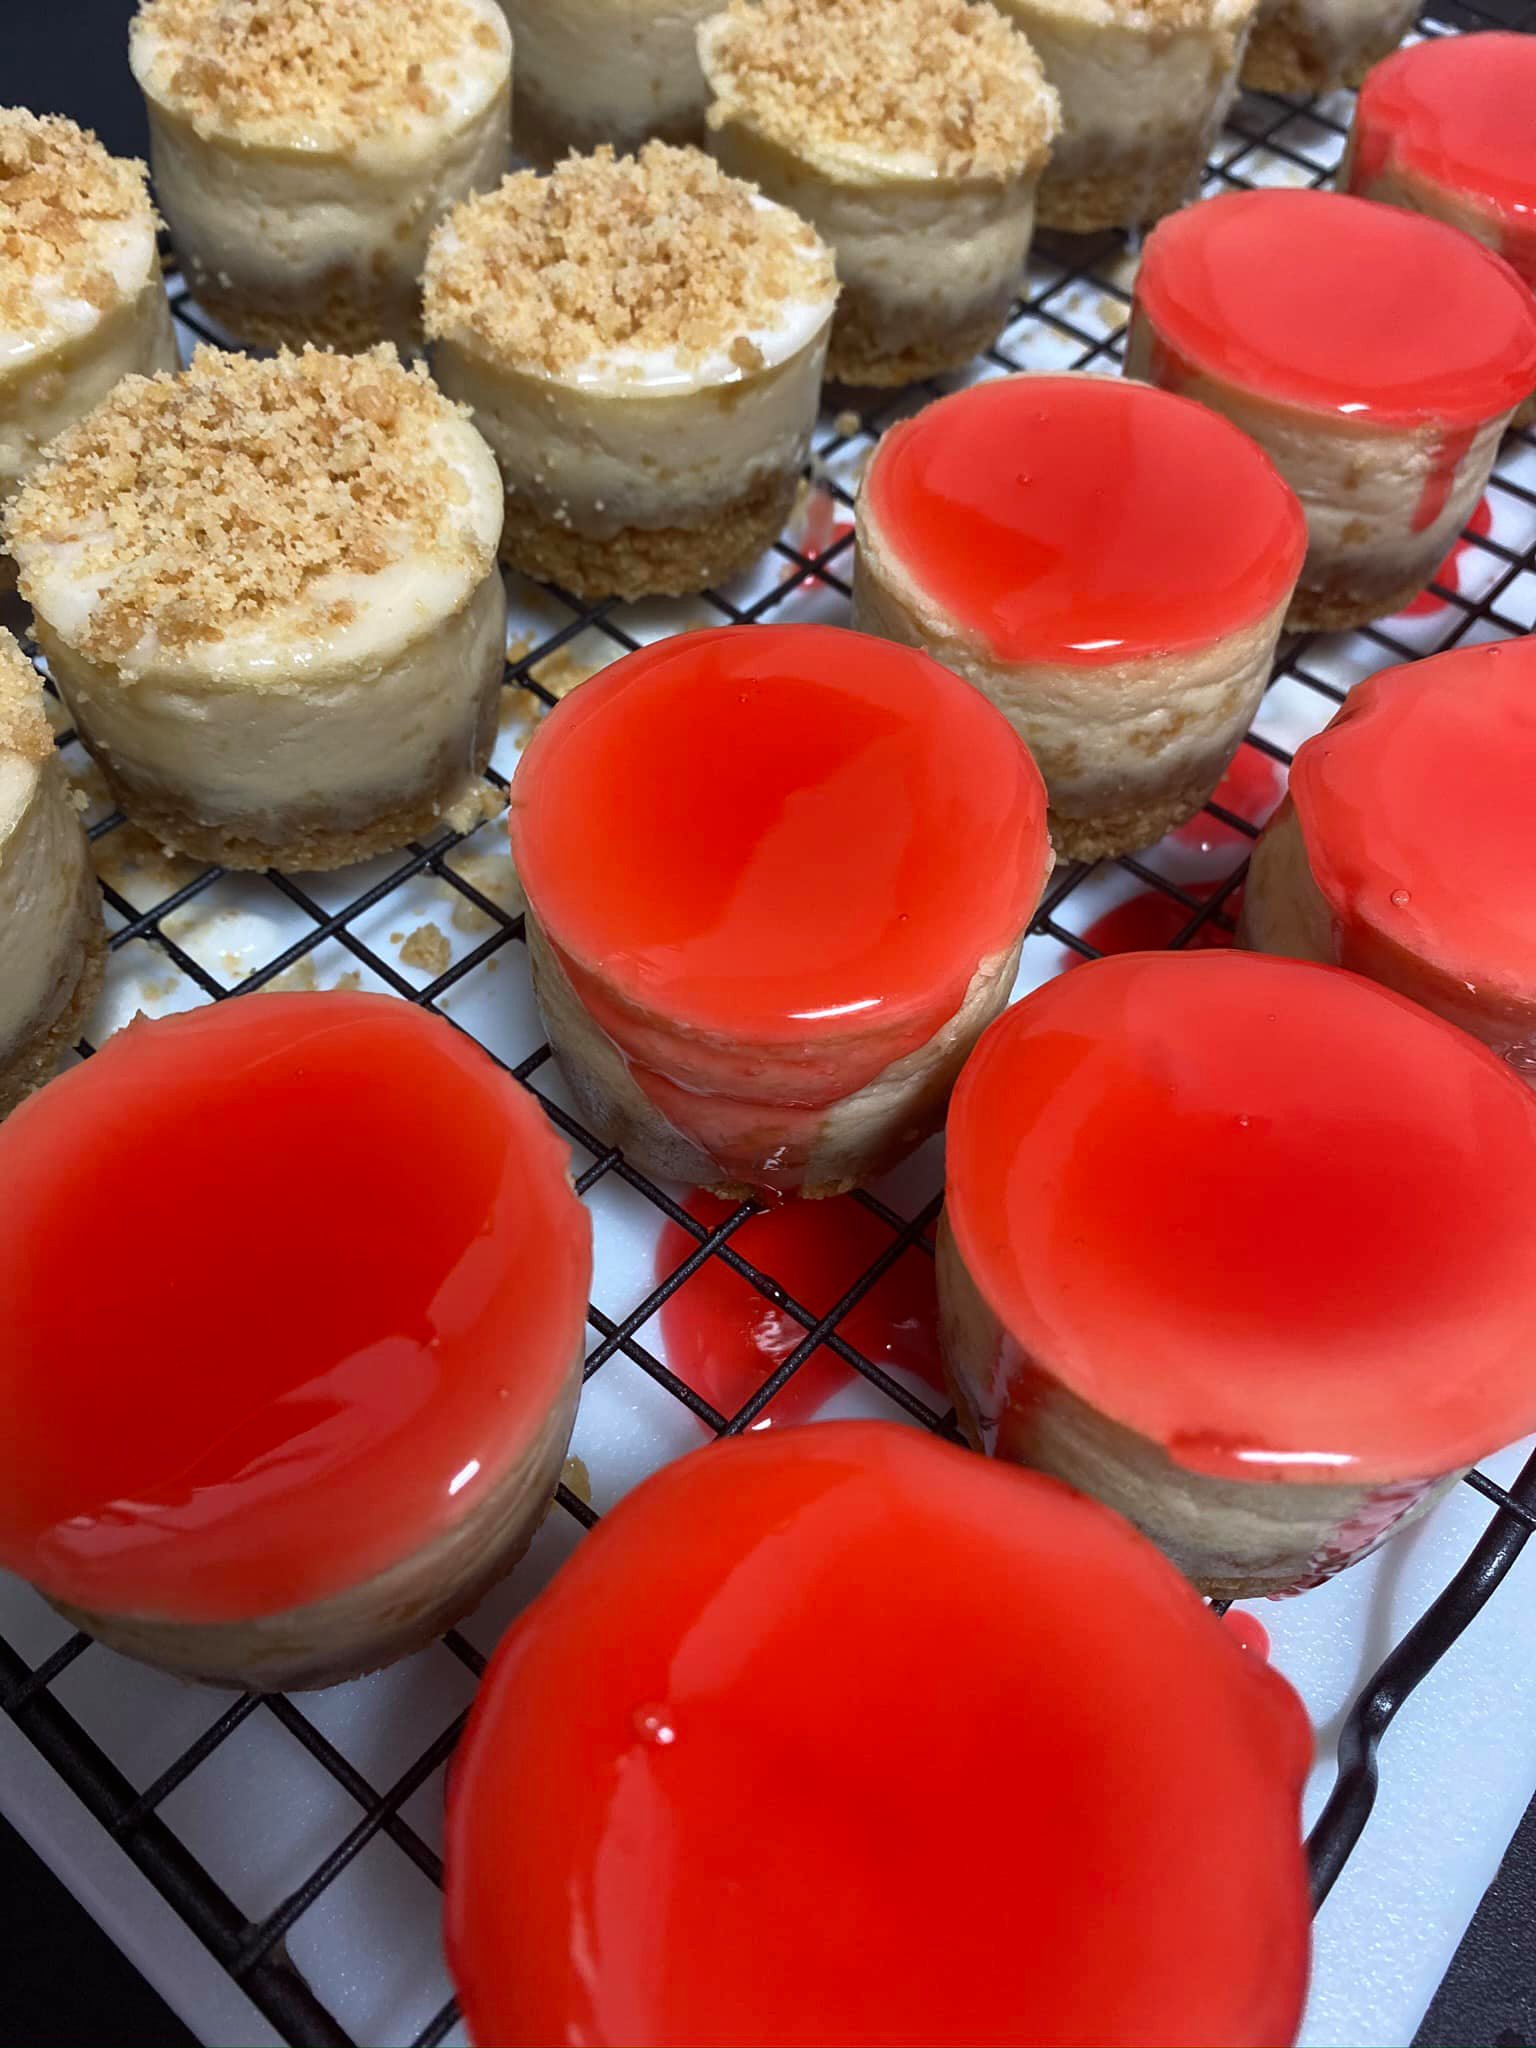 Crumble and red glaze cheesecakes